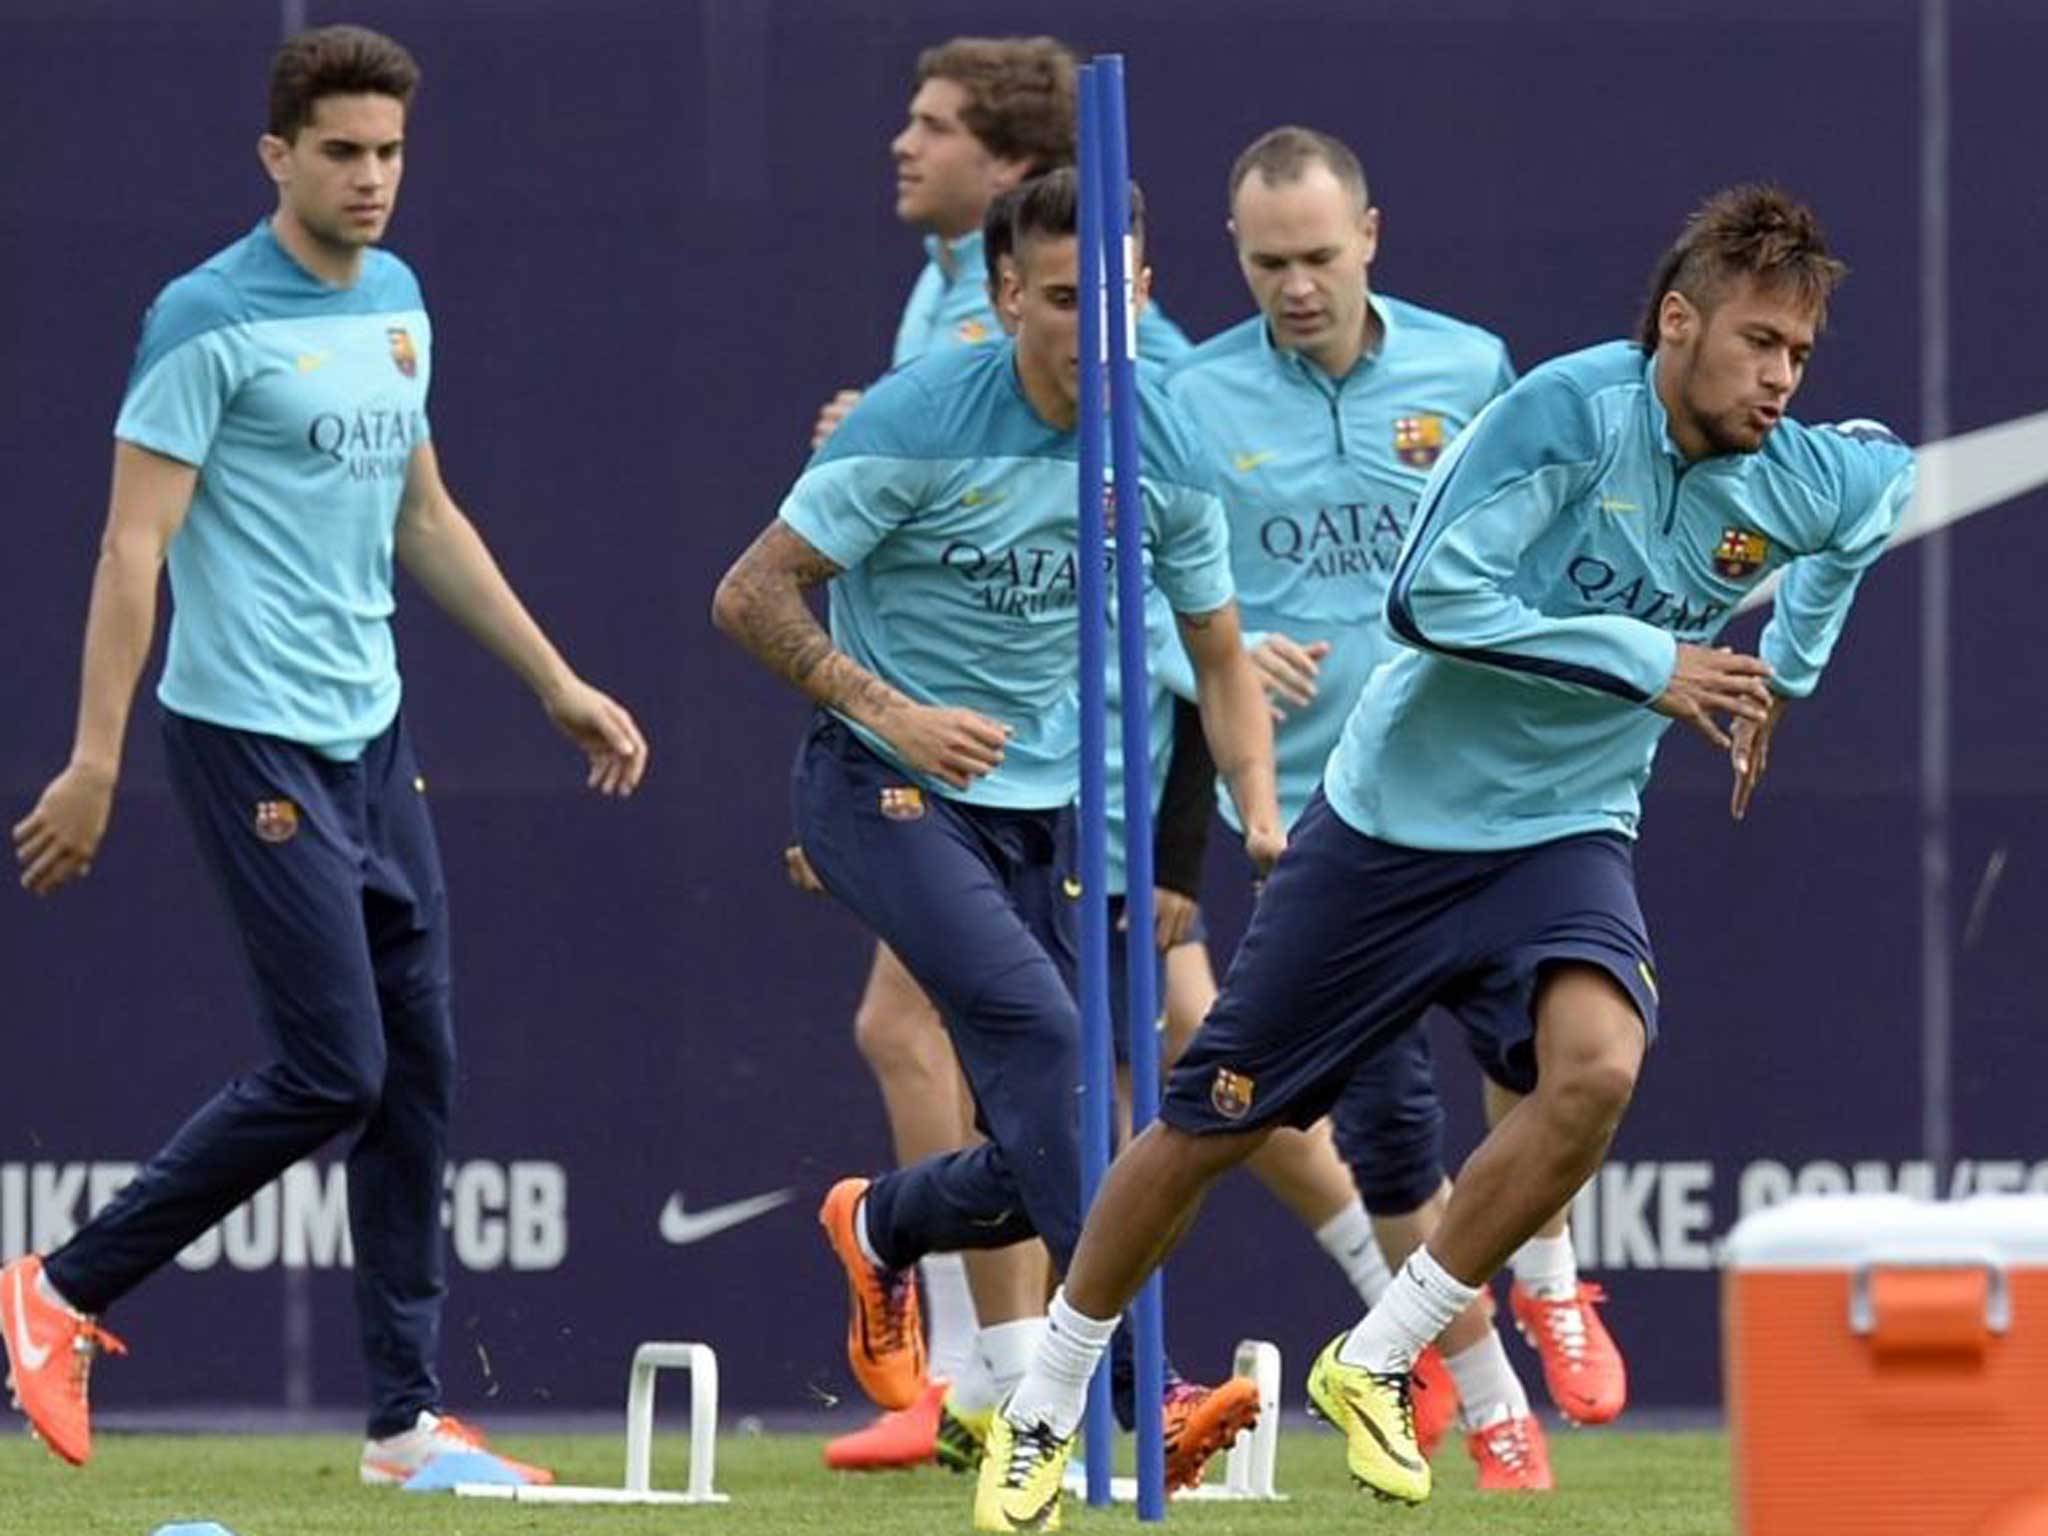 Training camp: Neymar (right) exercises with Barcelona team-mates ahead of today’s Clasico against Real Madrid